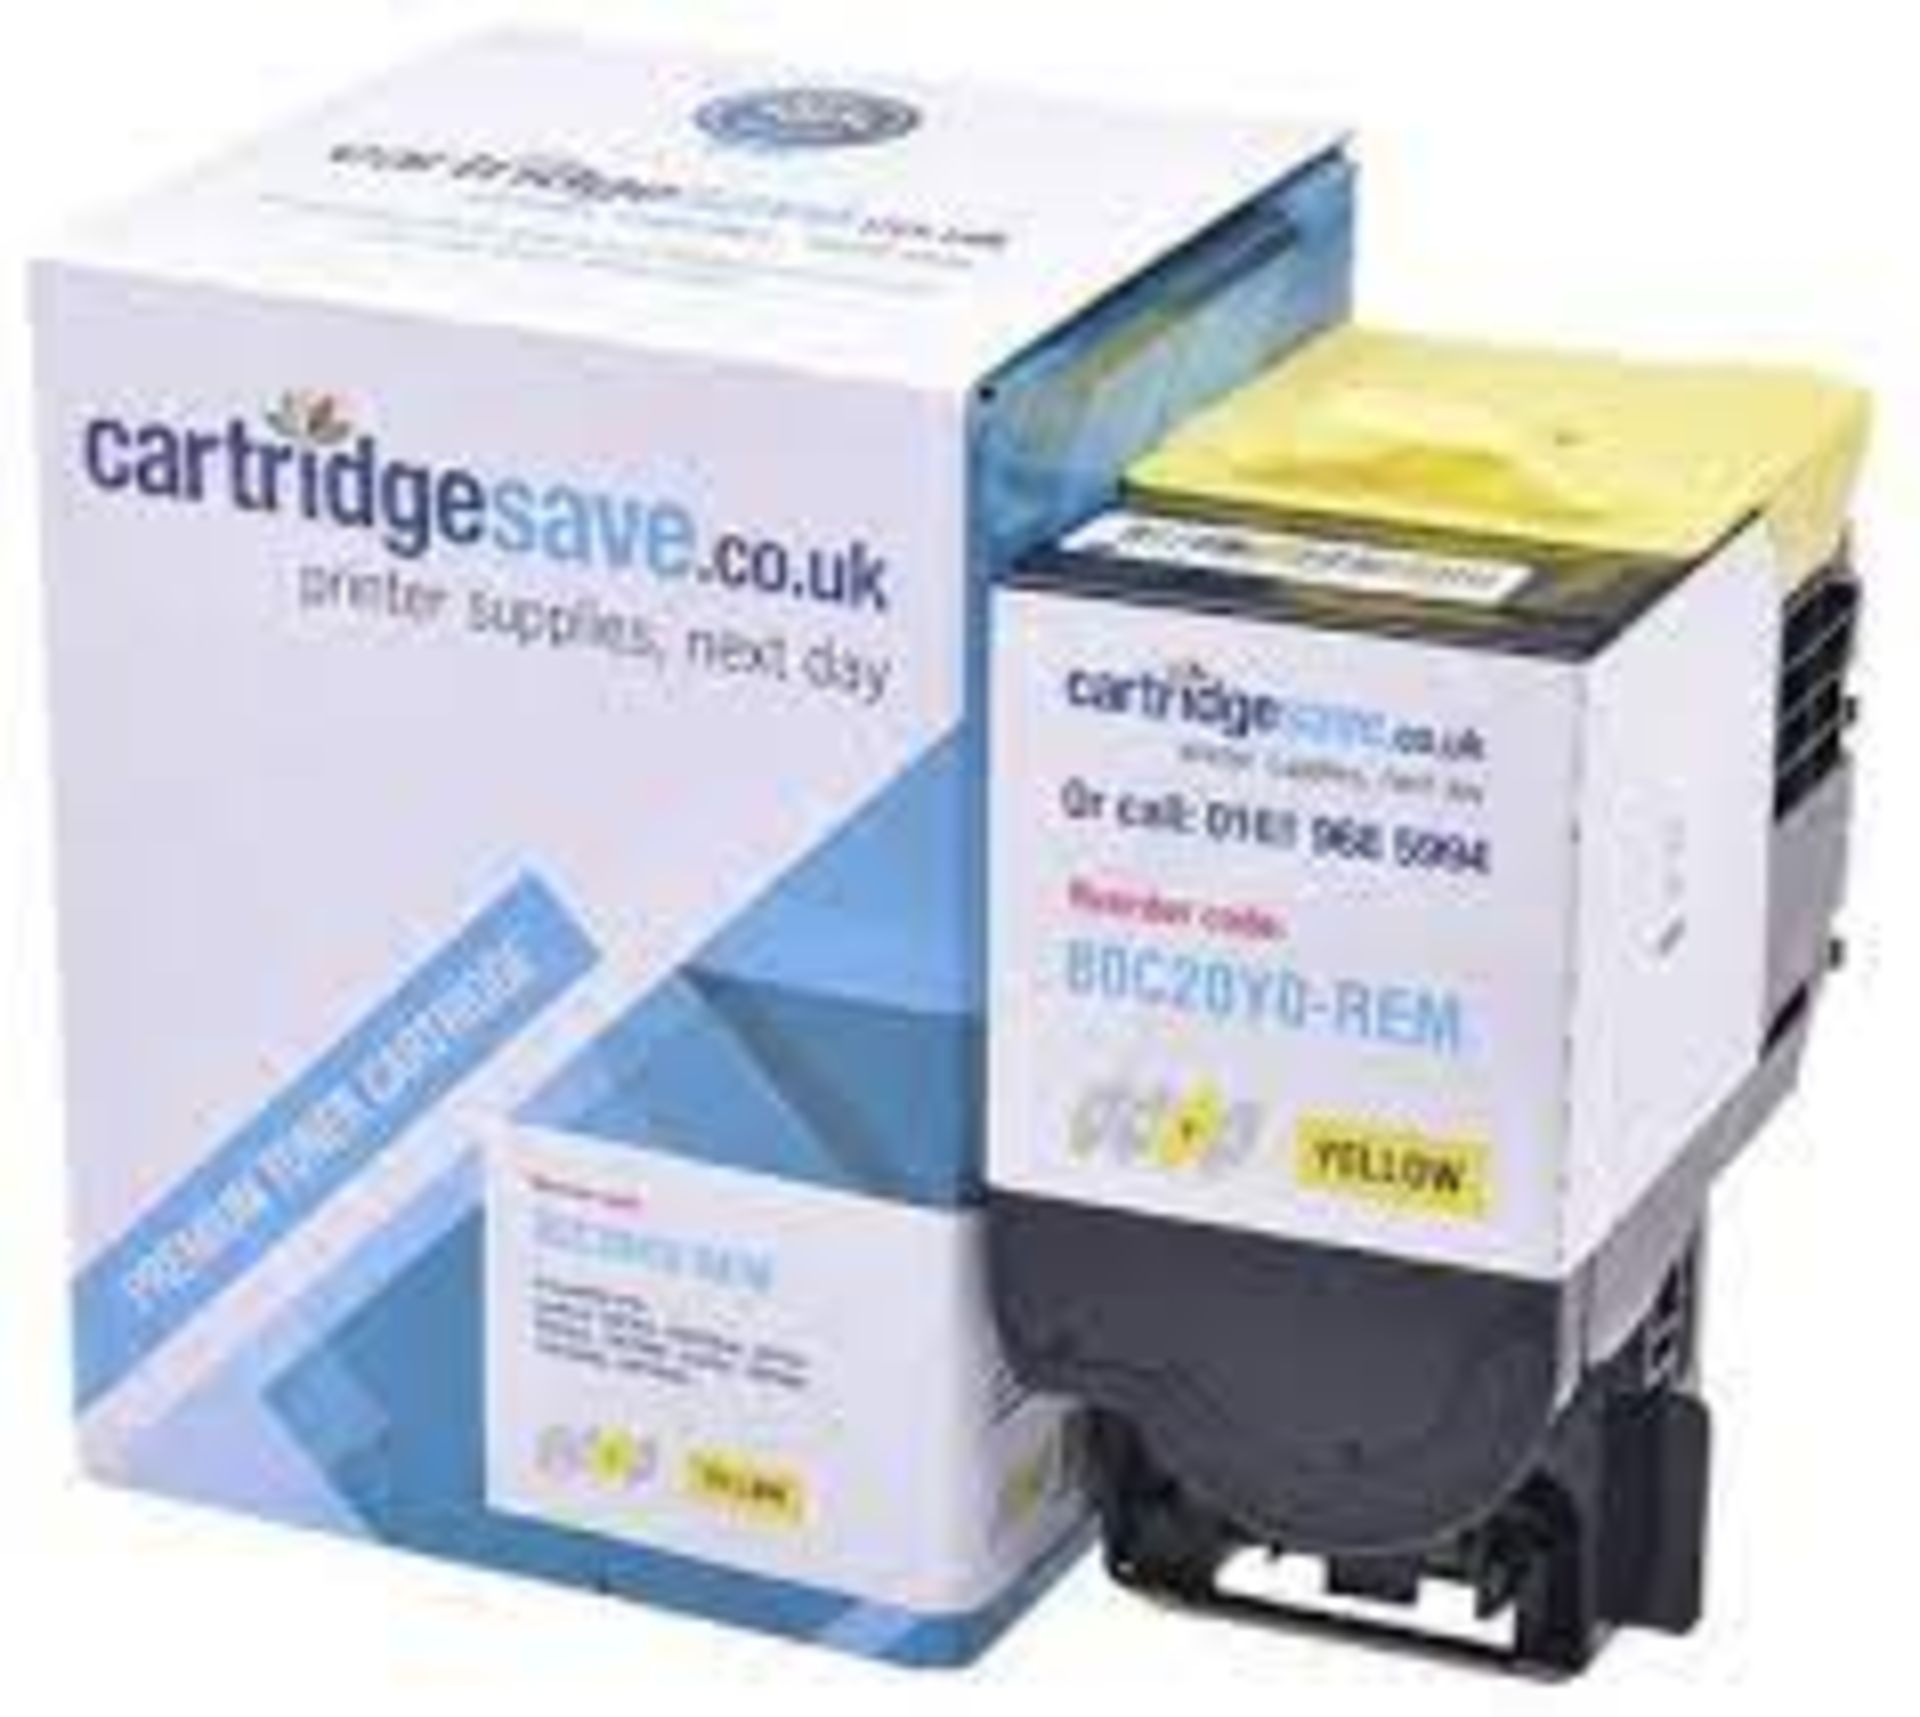 OVER 16000 BRAND NEW PRINTER CARTRIDGES/TONERS COMPATIBLE WITH BROTHER, EPSON, HP, CANON ETC. OVER 3 - Image 9 of 10